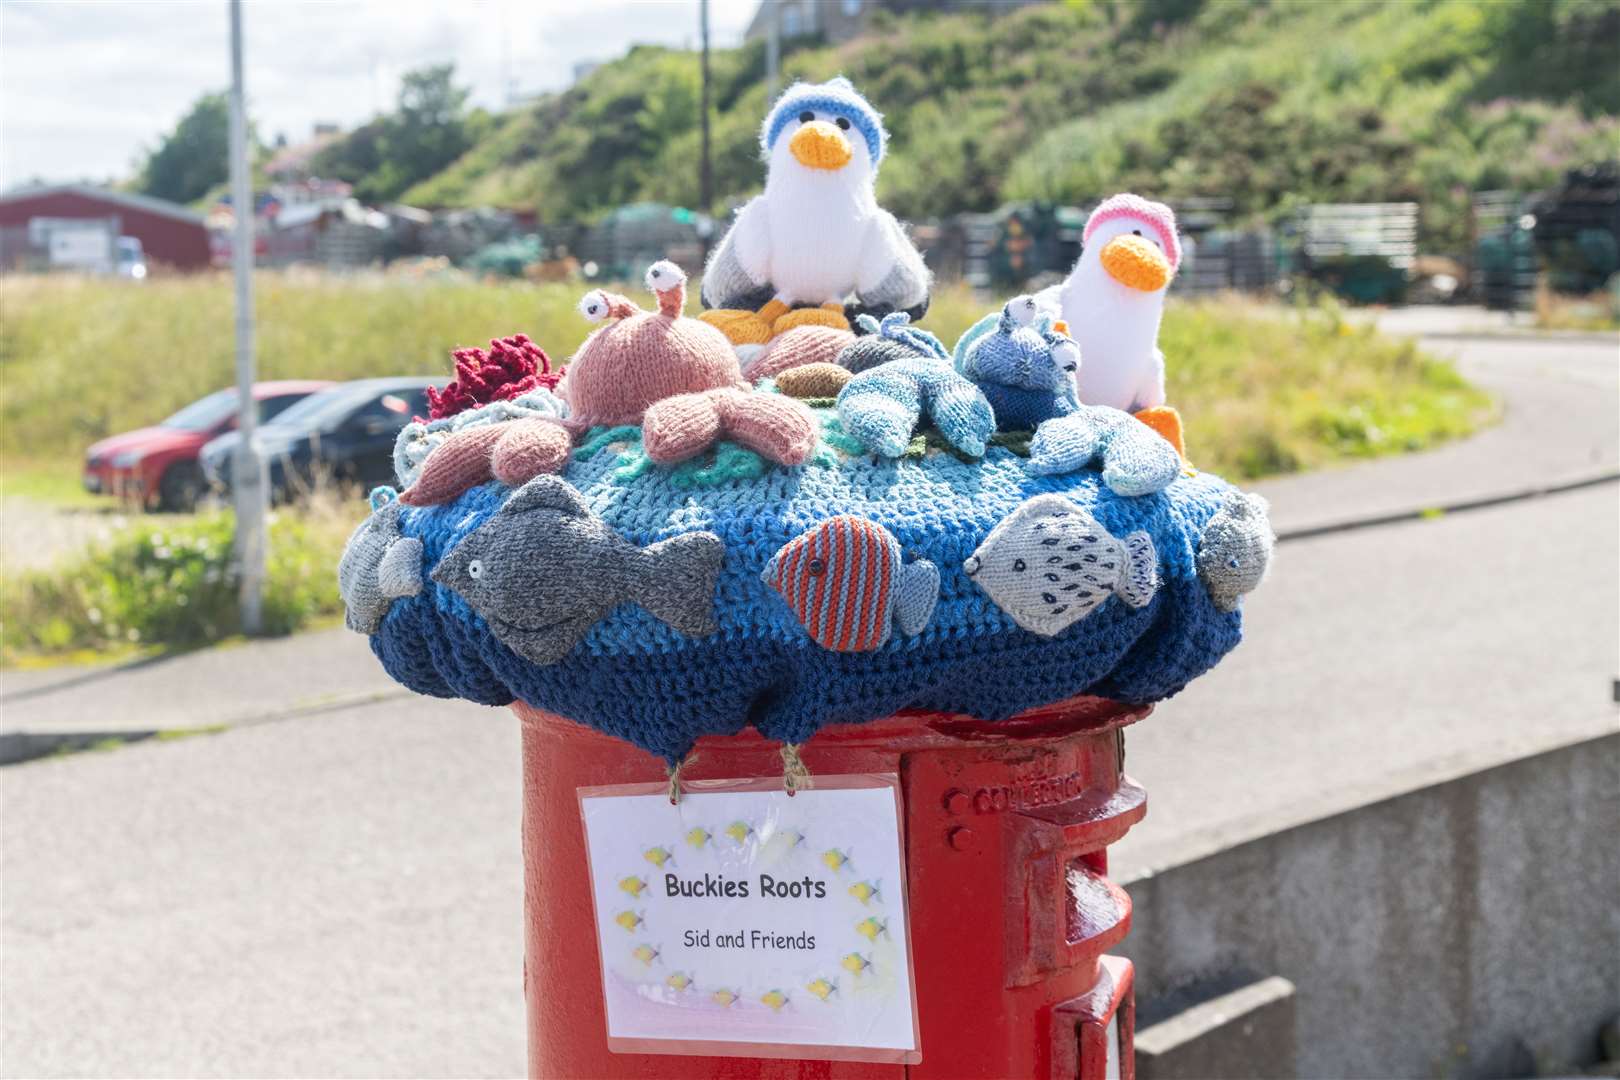 Meet Sid and Friends at the post box outside Eat Mair Fish in Buckie. Picture: Beth Taylor